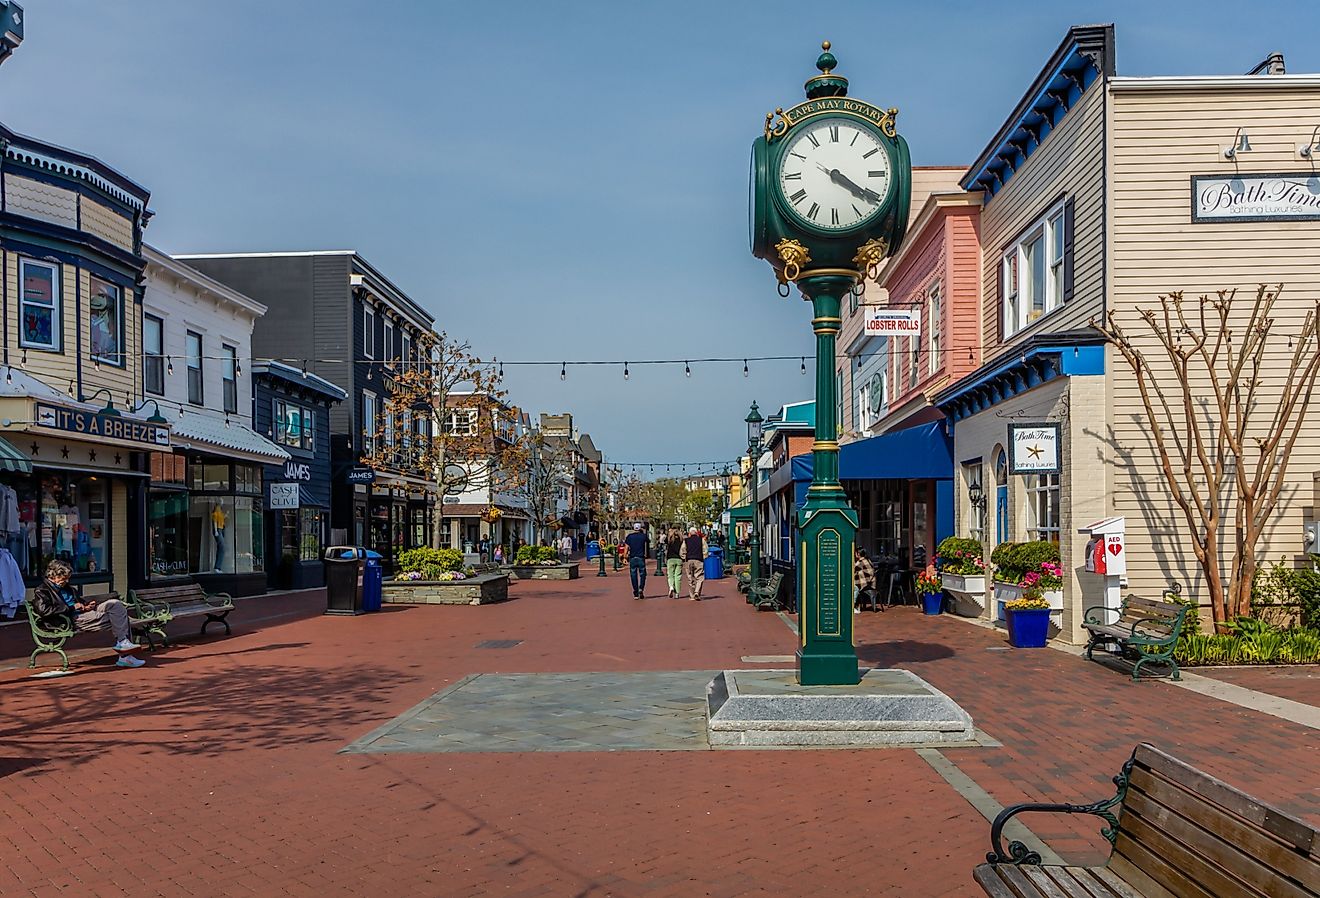 Washington Mall on a sunny spring afternoon, Cape May, New Jersey. Image credit Rabbitti via Shutterstock